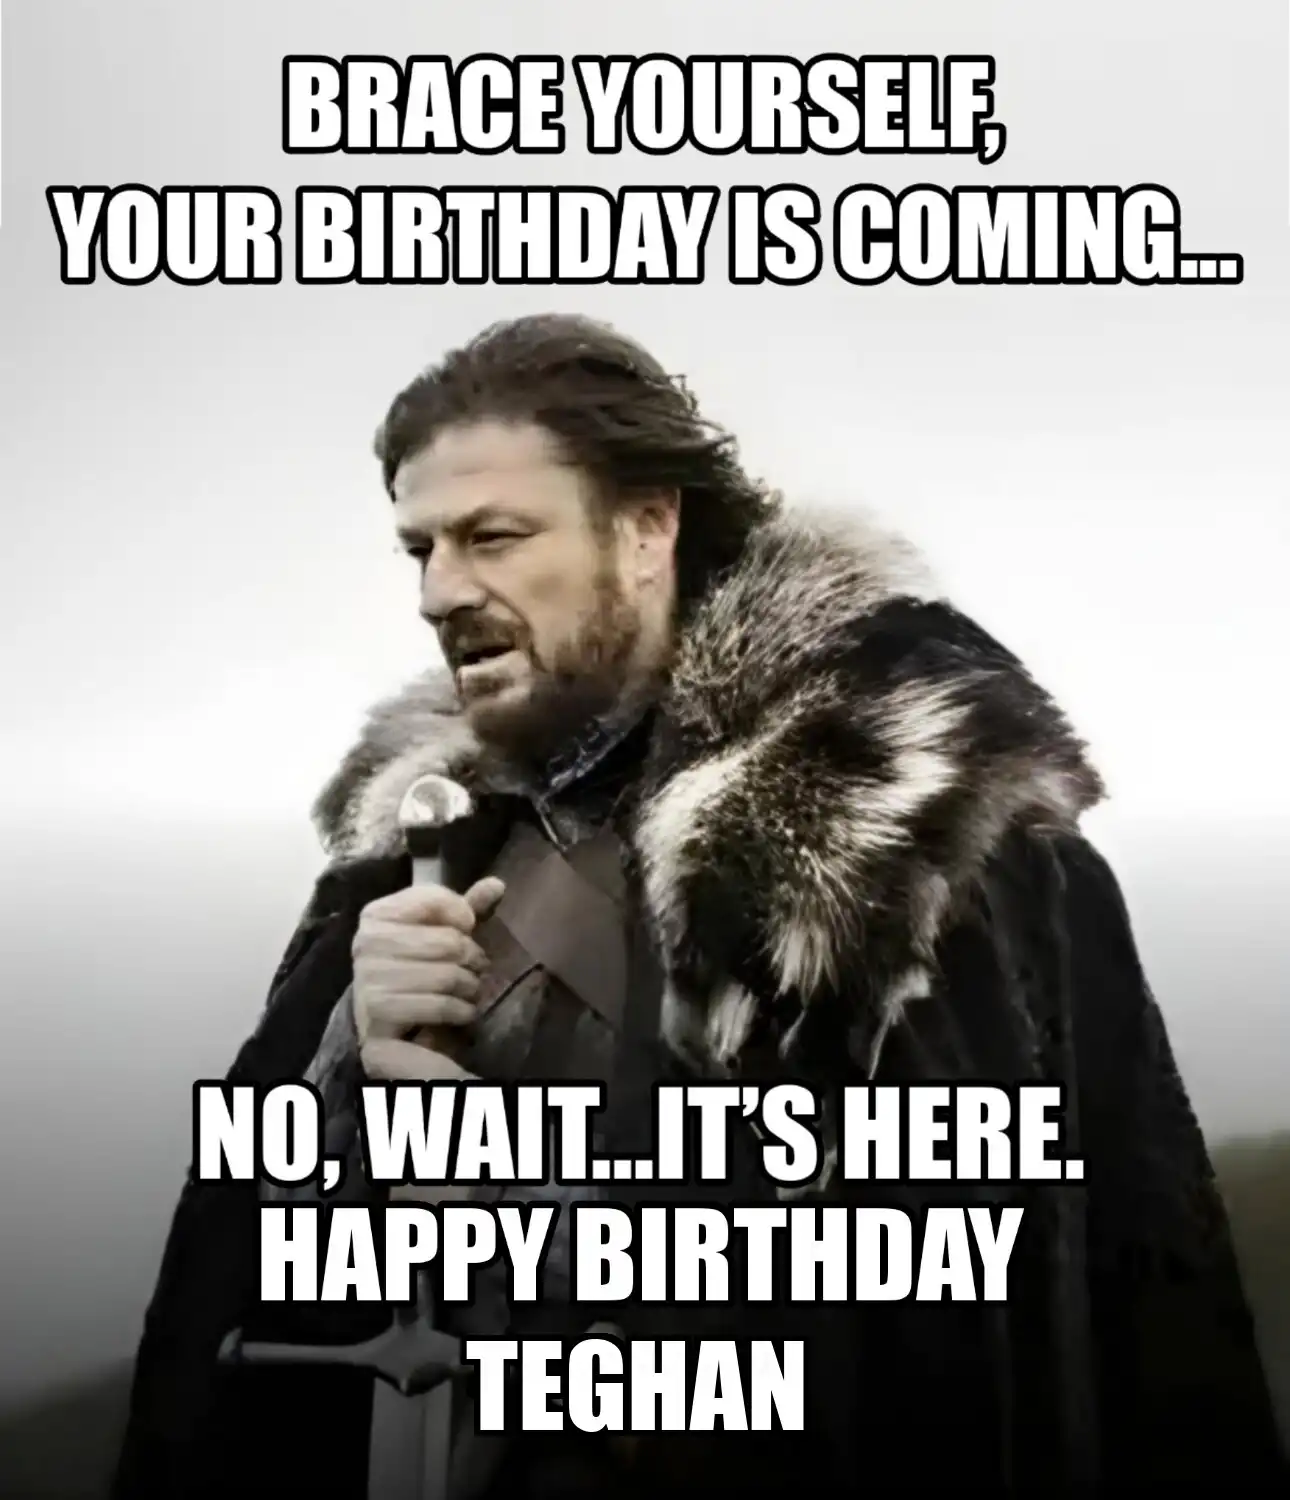 Happy Birthday Teghan Brace Yourself Your Birthday Is Coming Meme